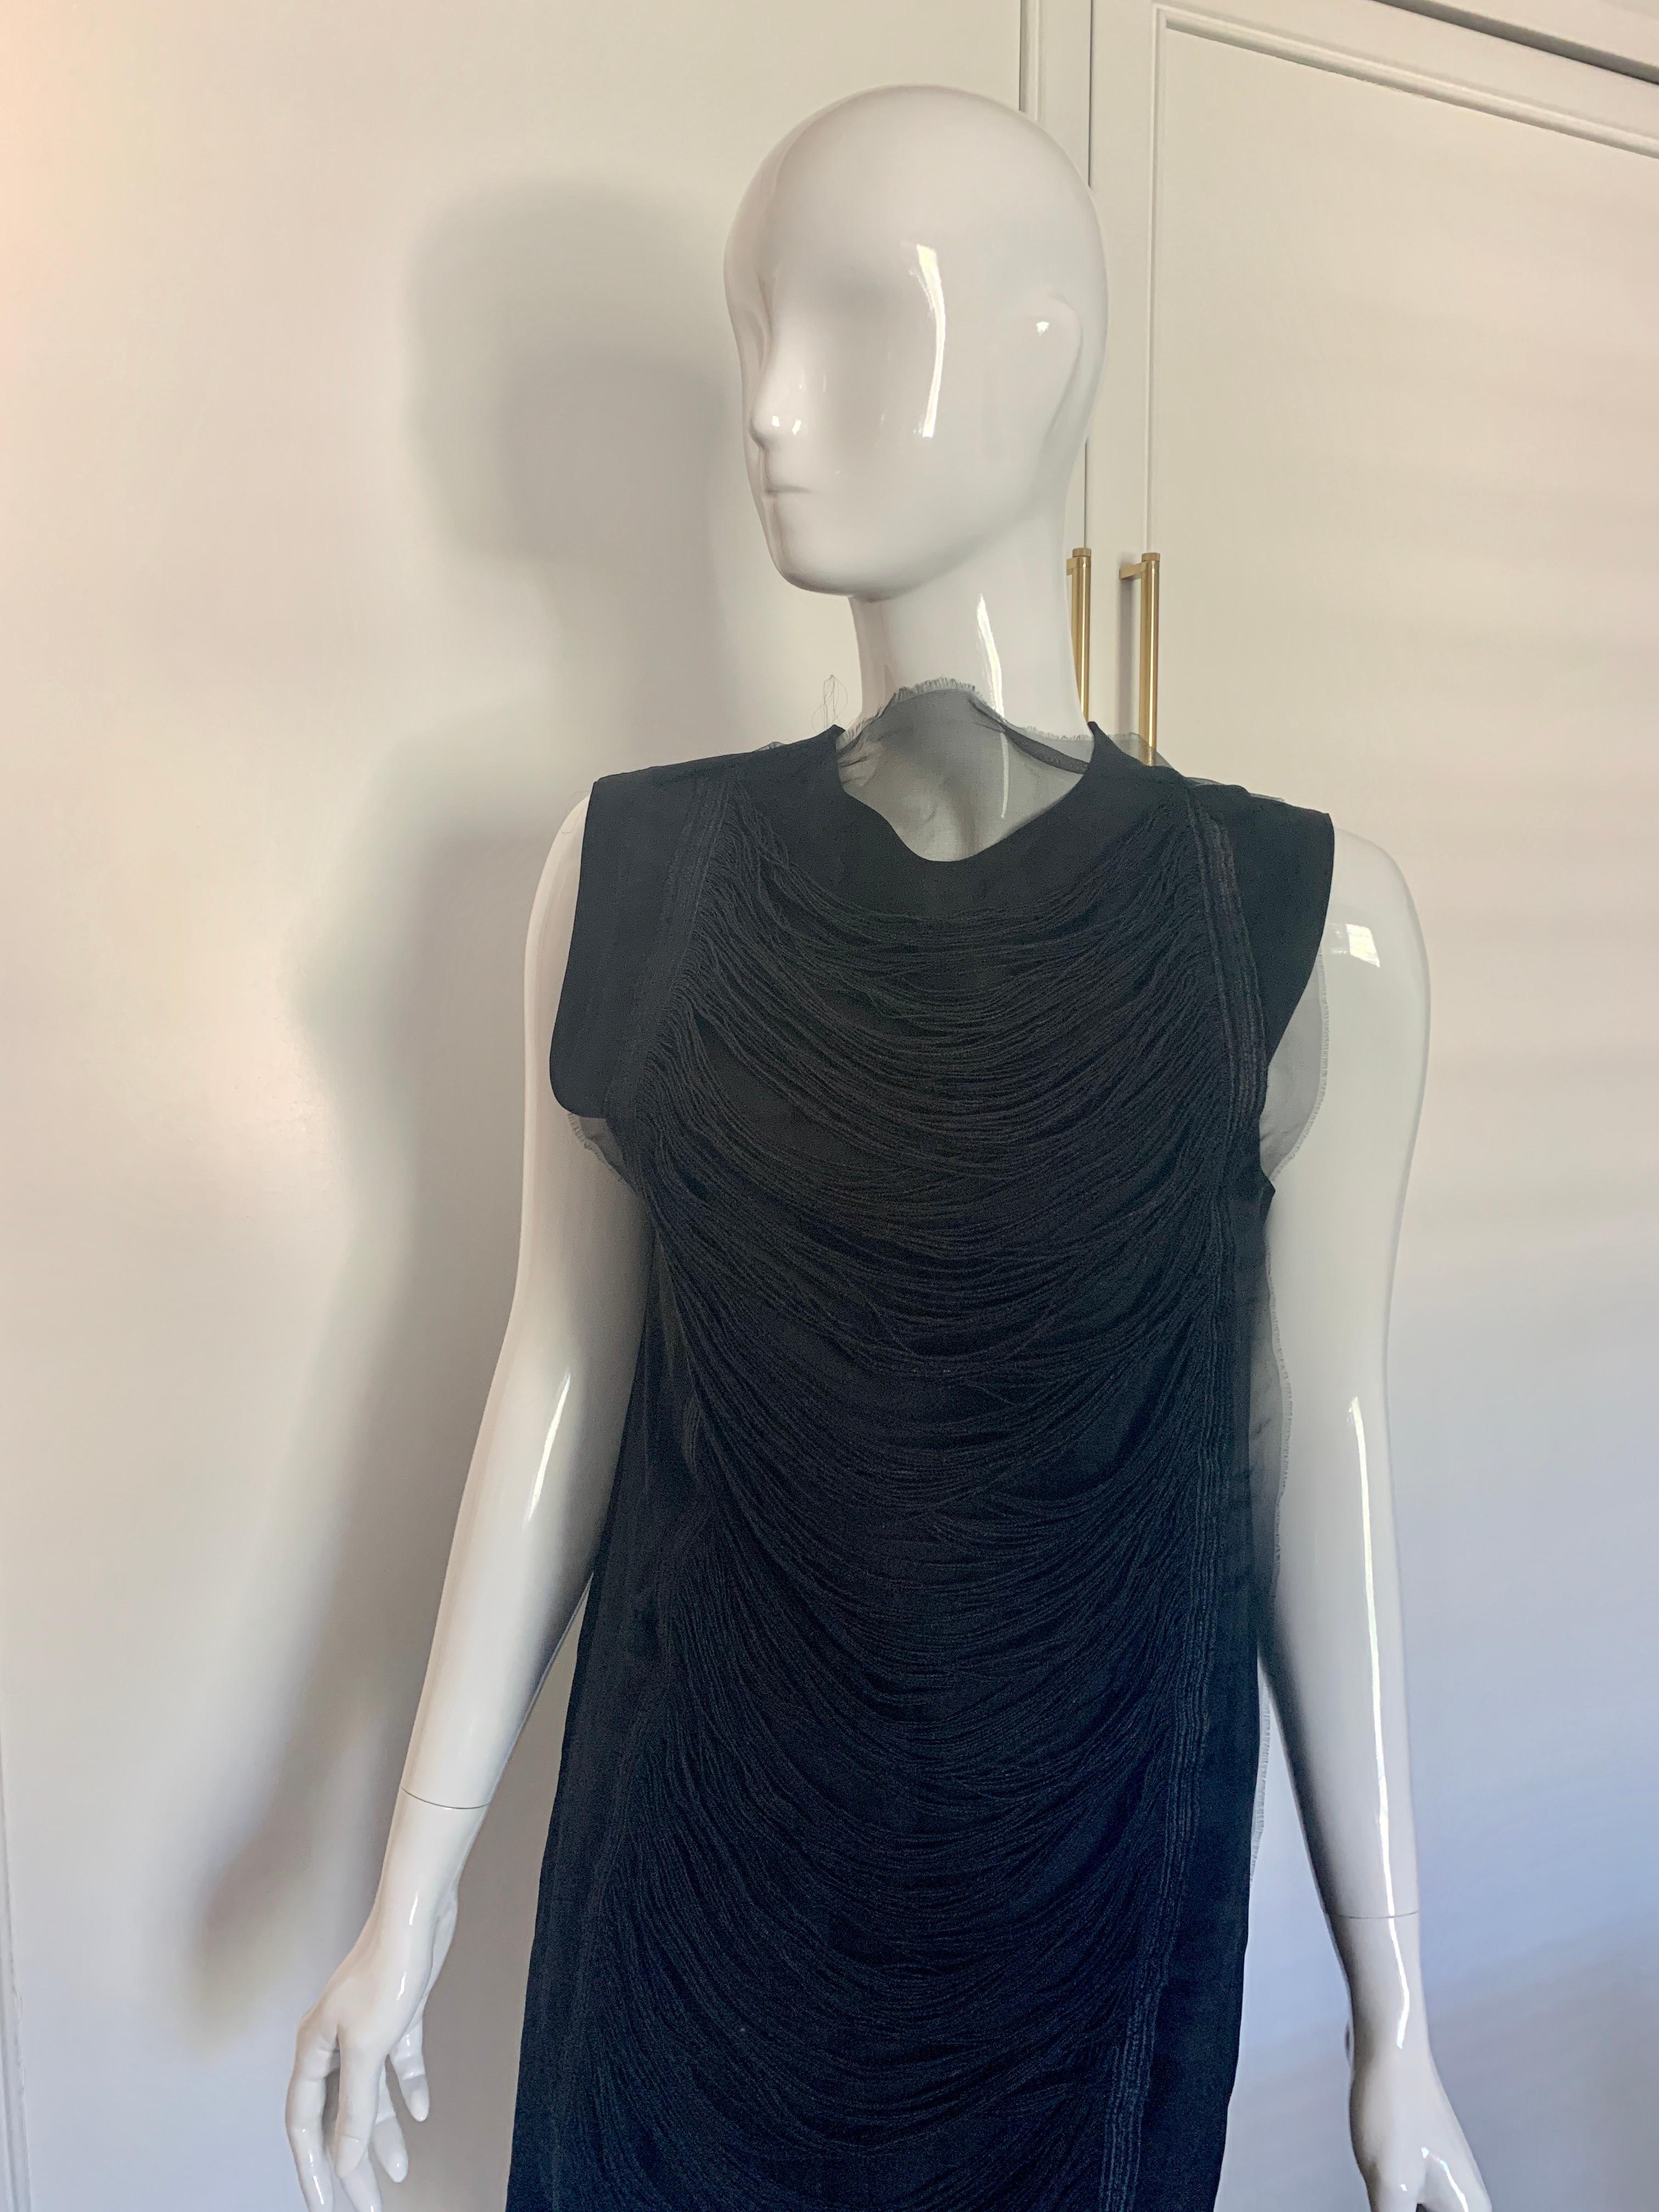 JW Anderson Black Fringe Shift Dress  In Good Condition For Sale In Thousand Oaks, CA